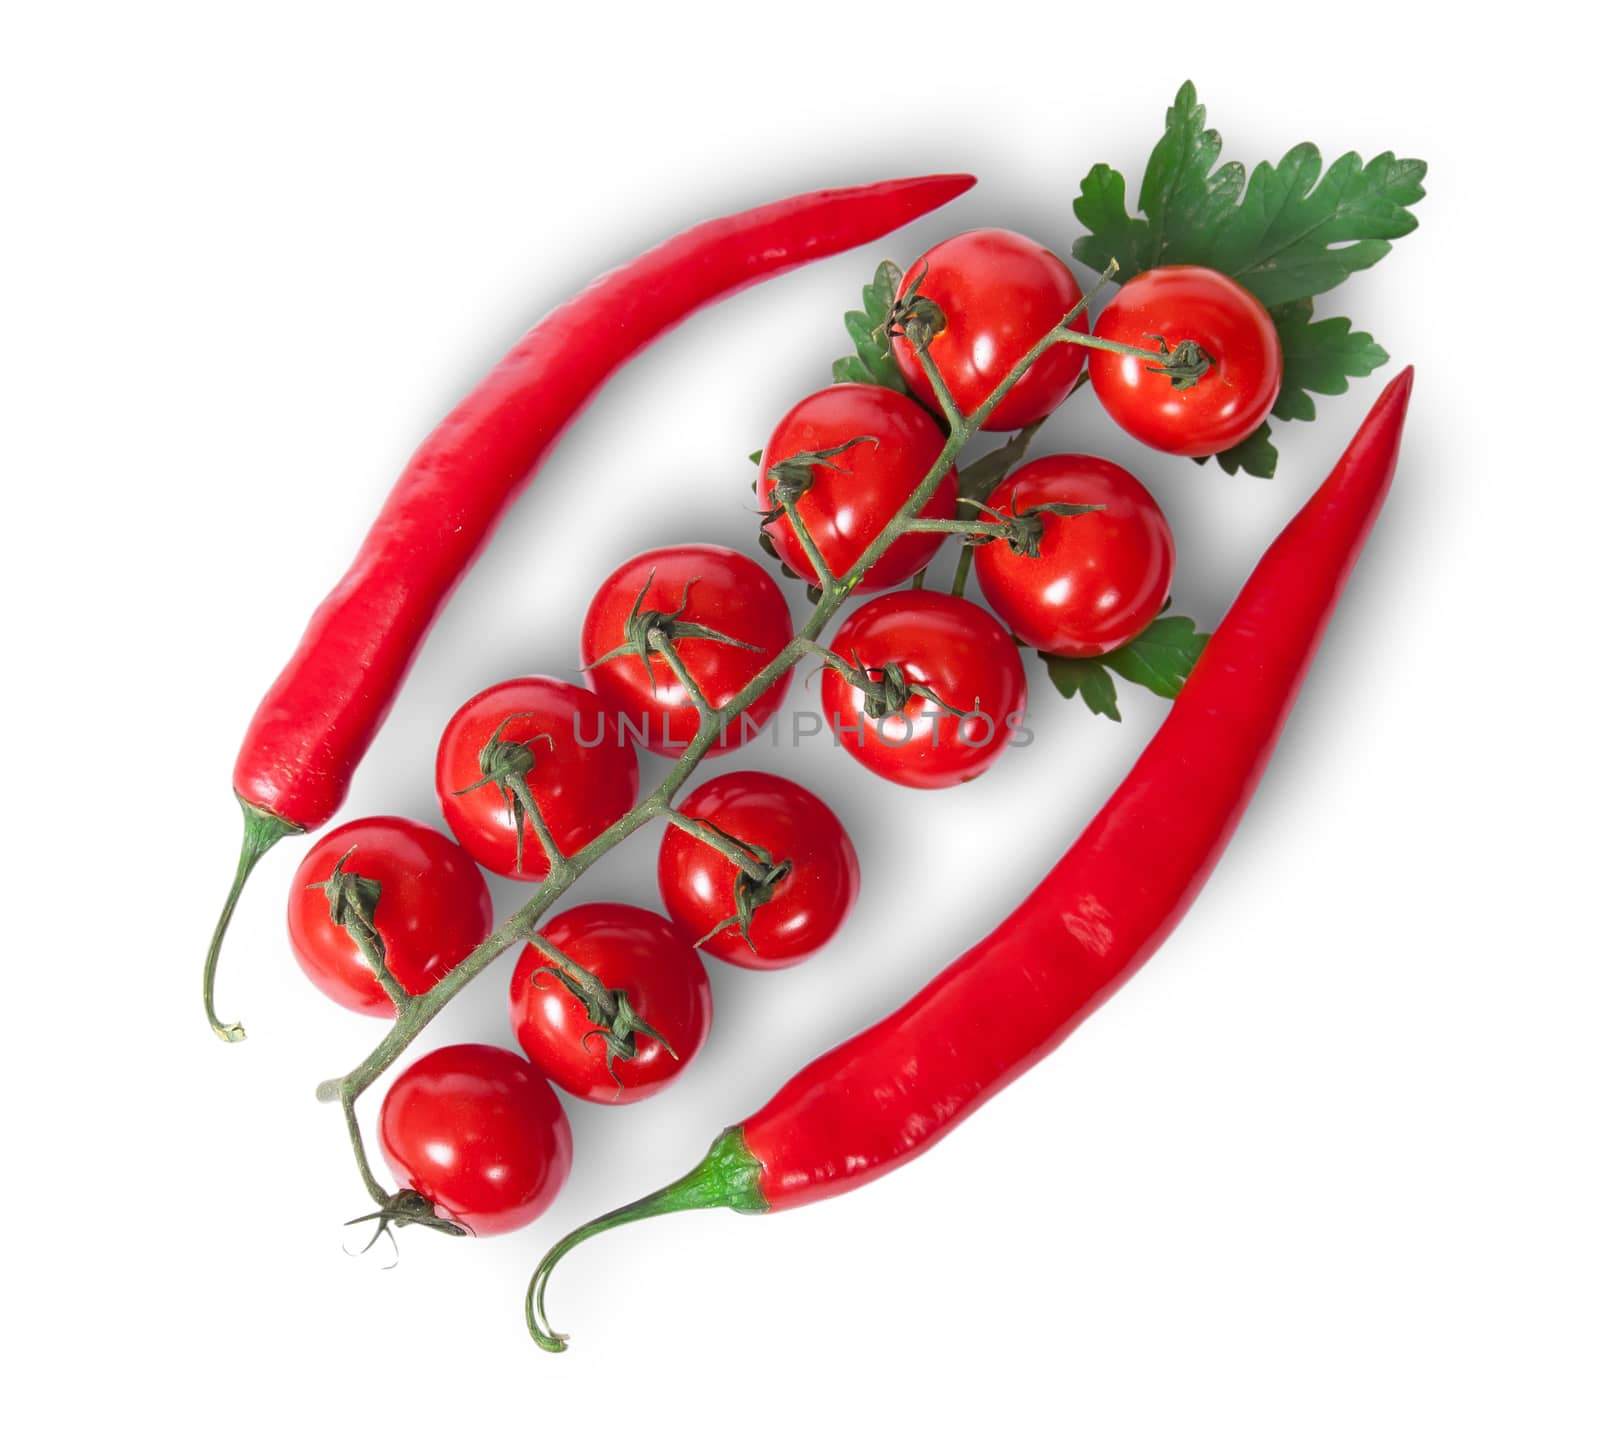 Two chili pepper and cherry tomatoes on stem with parsley by Cipariss